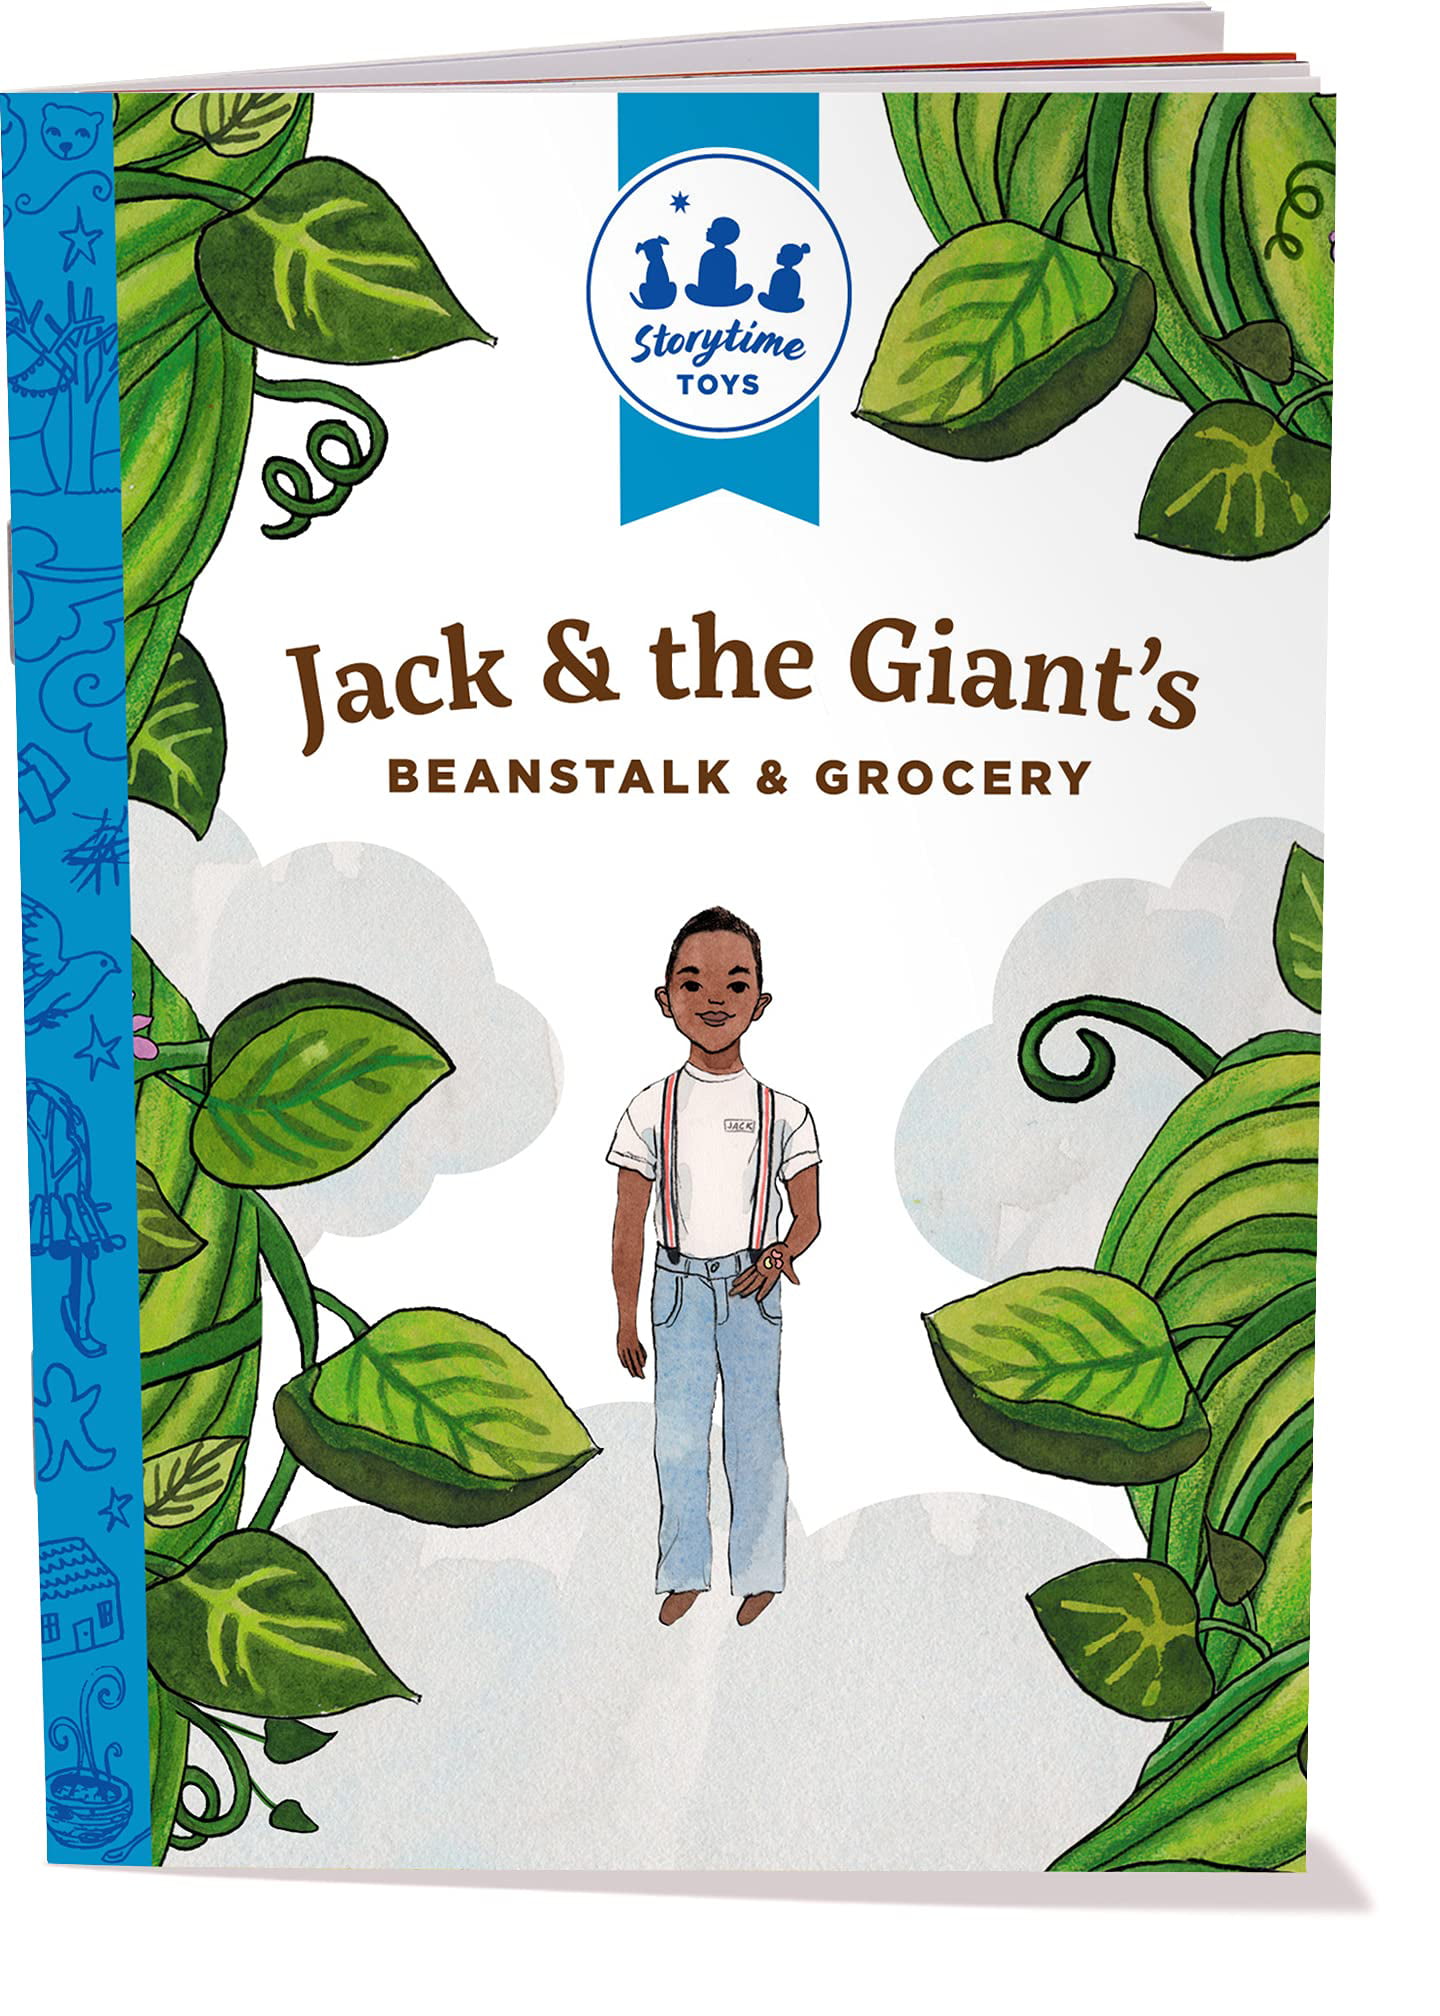 The Bookies Bookstore  Jack and the Beanstalk